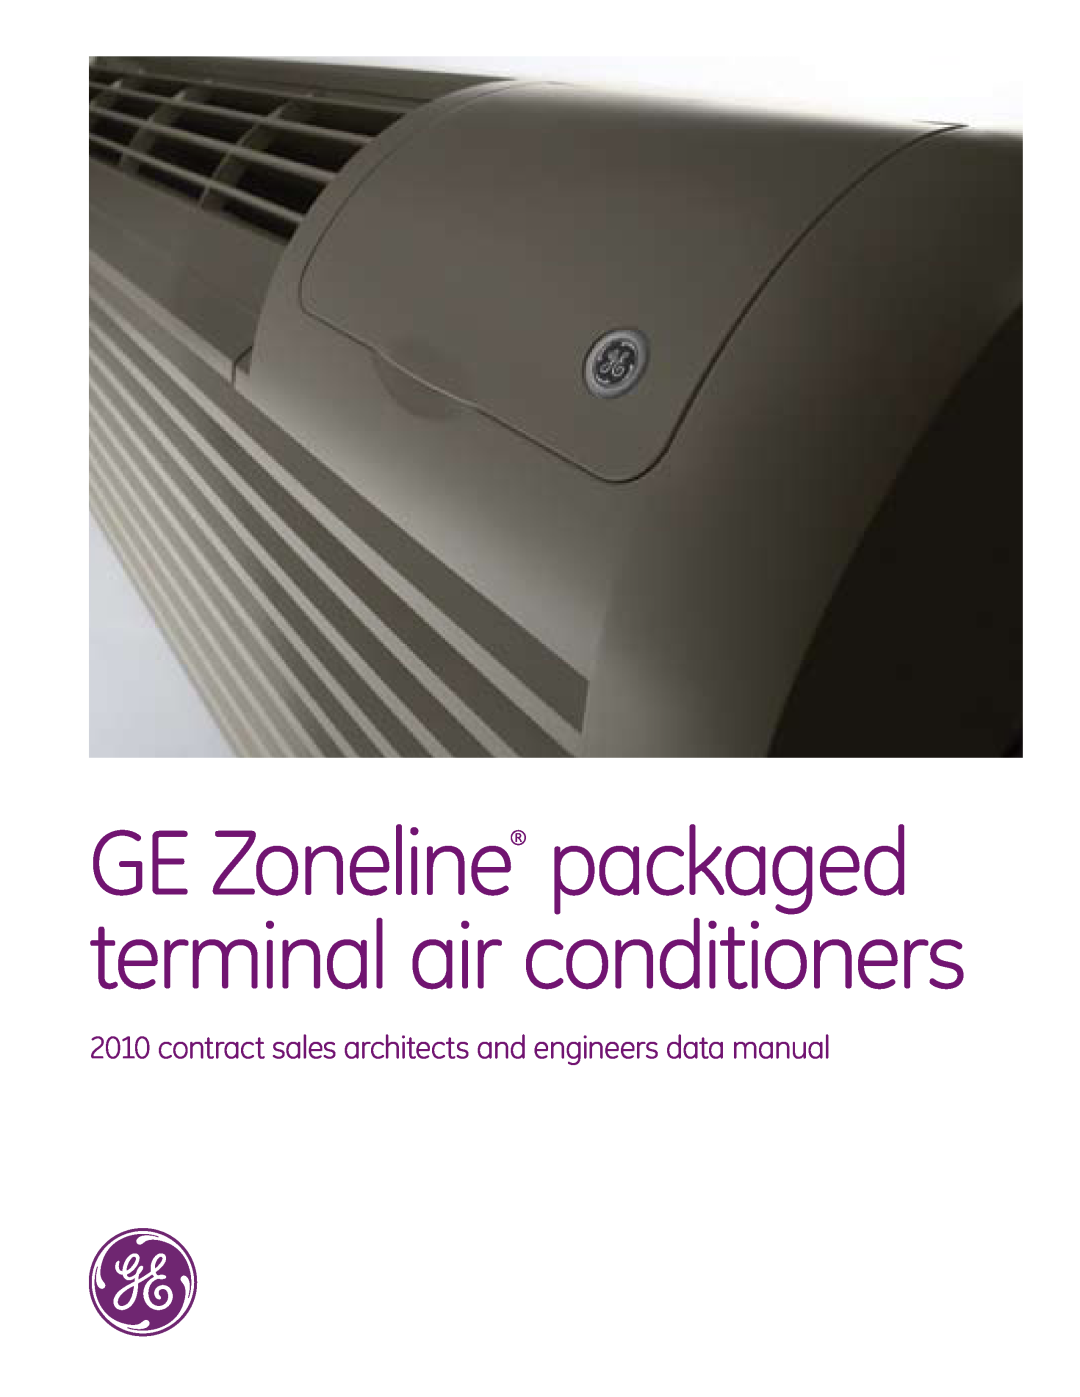 GE 4100, 6100 manual GE Zoneline packaged terminal air conditioners 